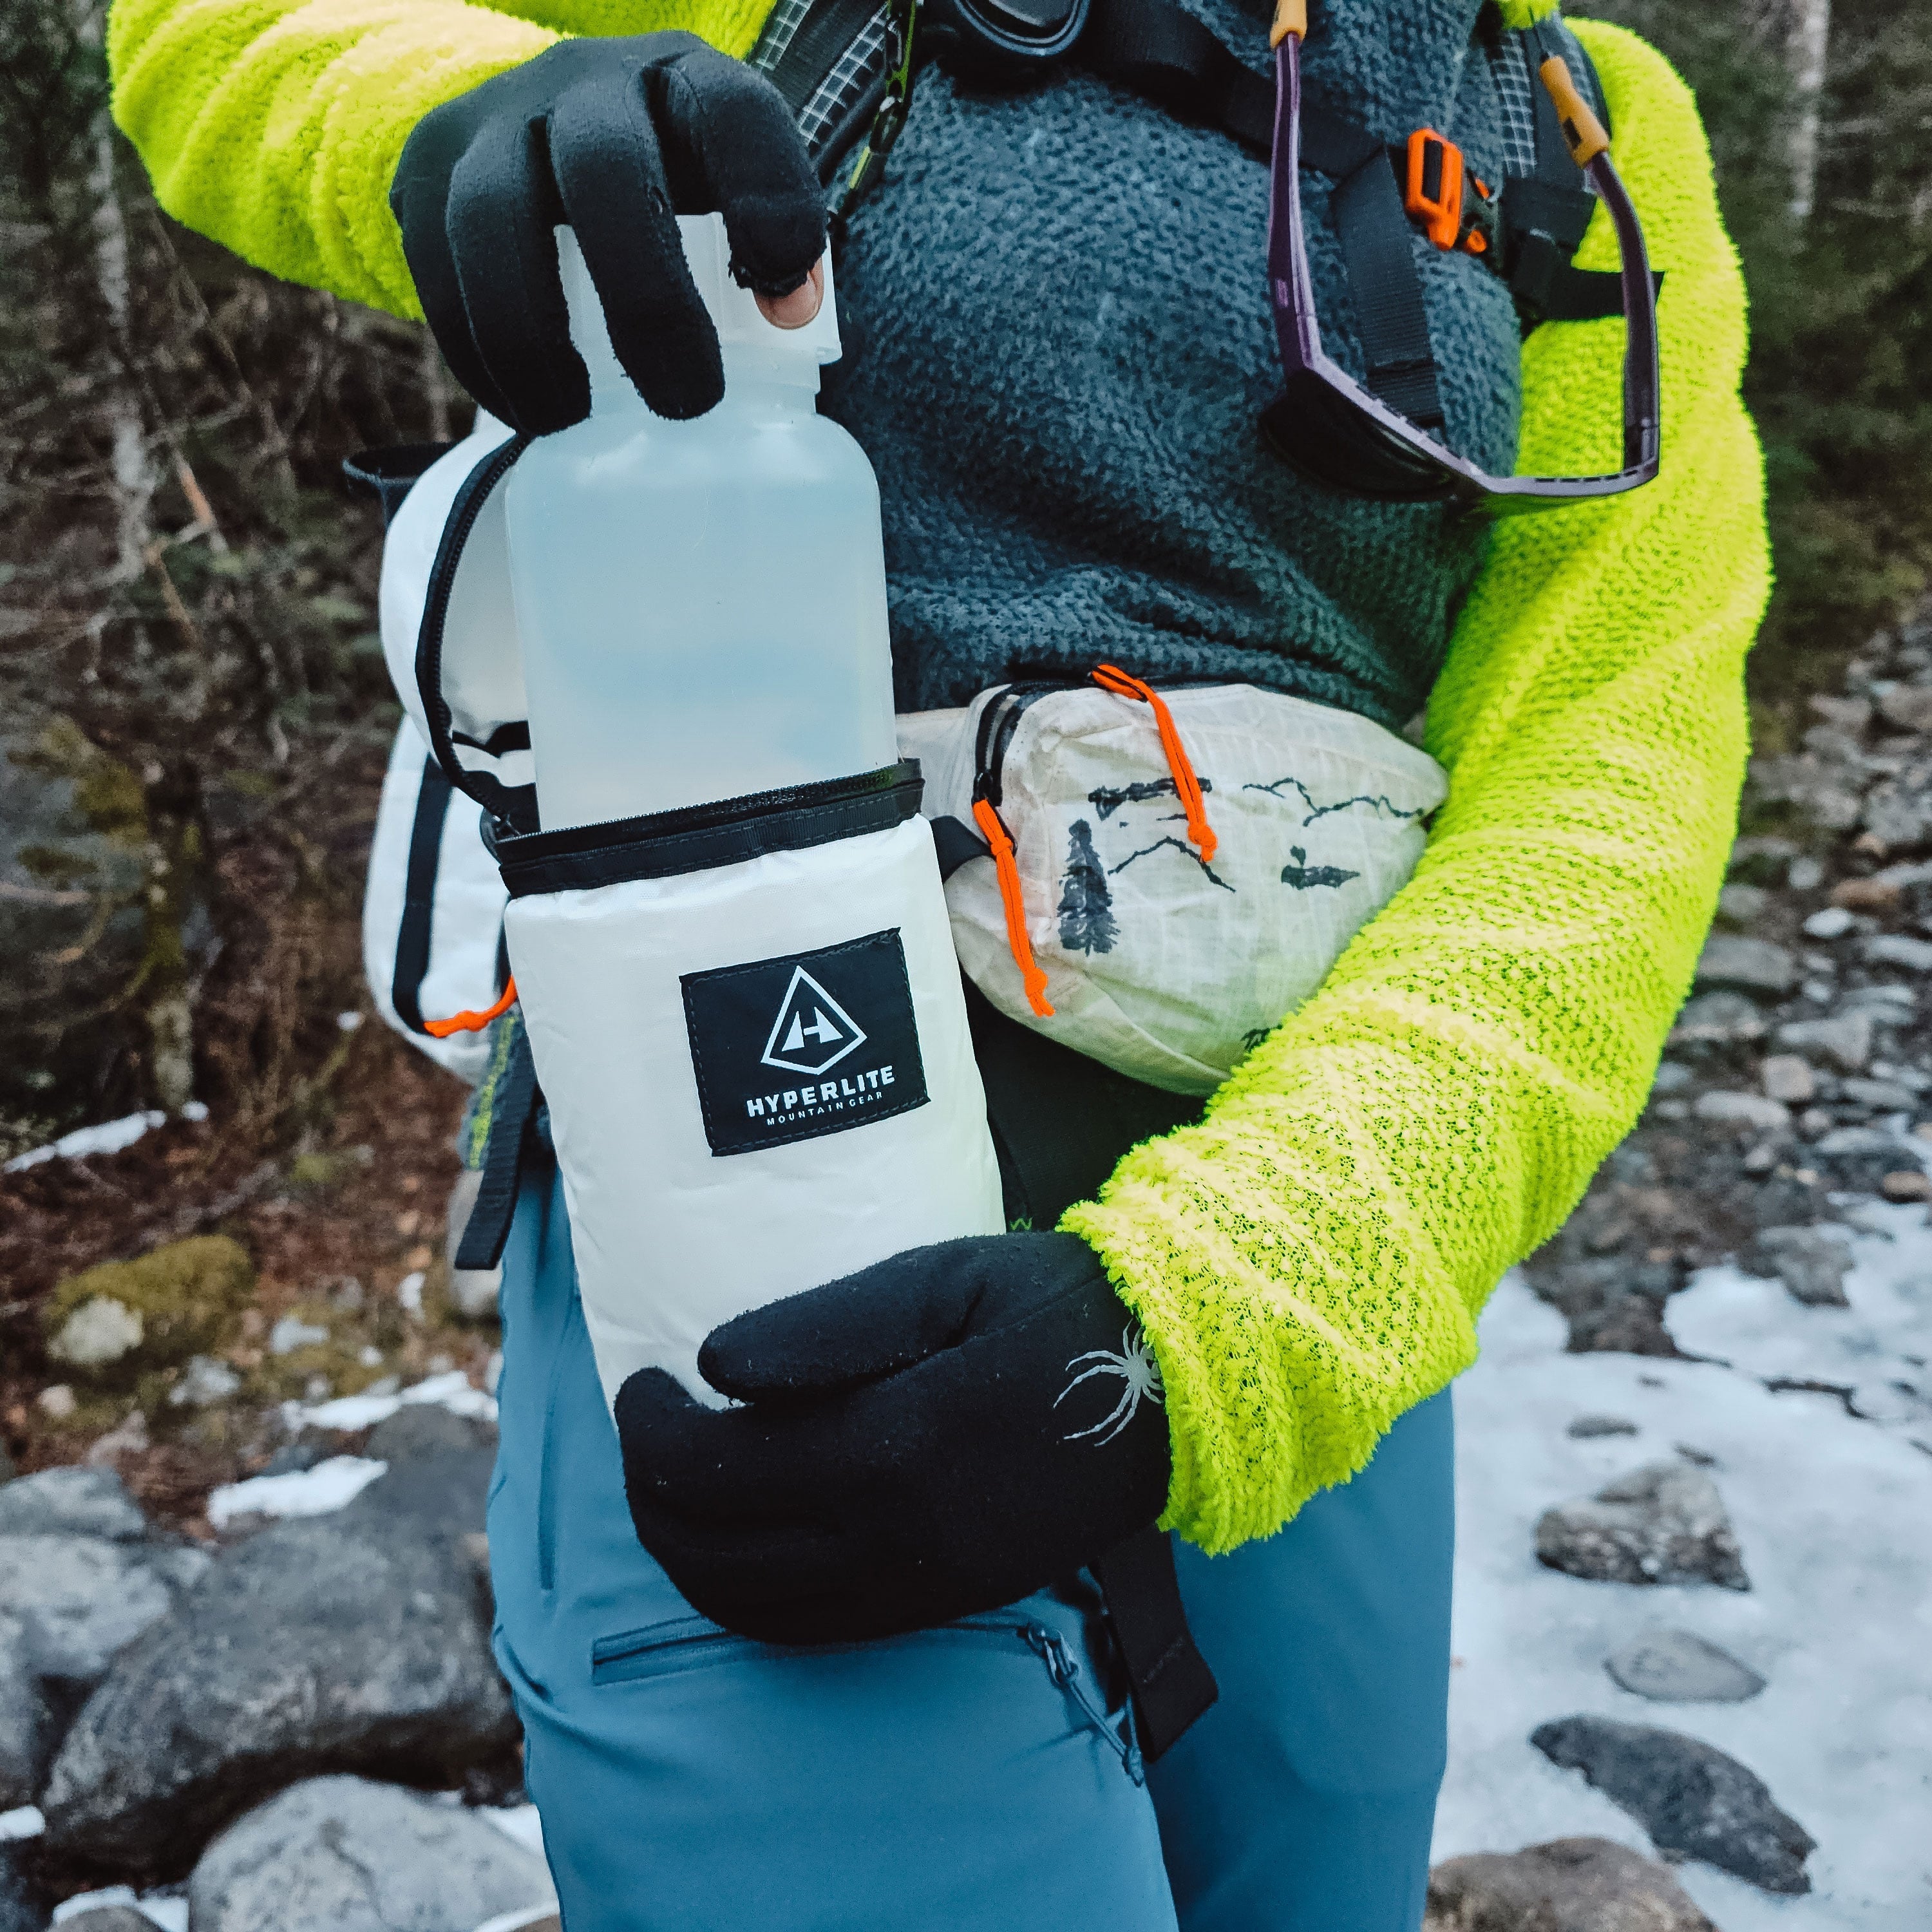 Zippers 101: Get the most out of your gear — The Mountaineers